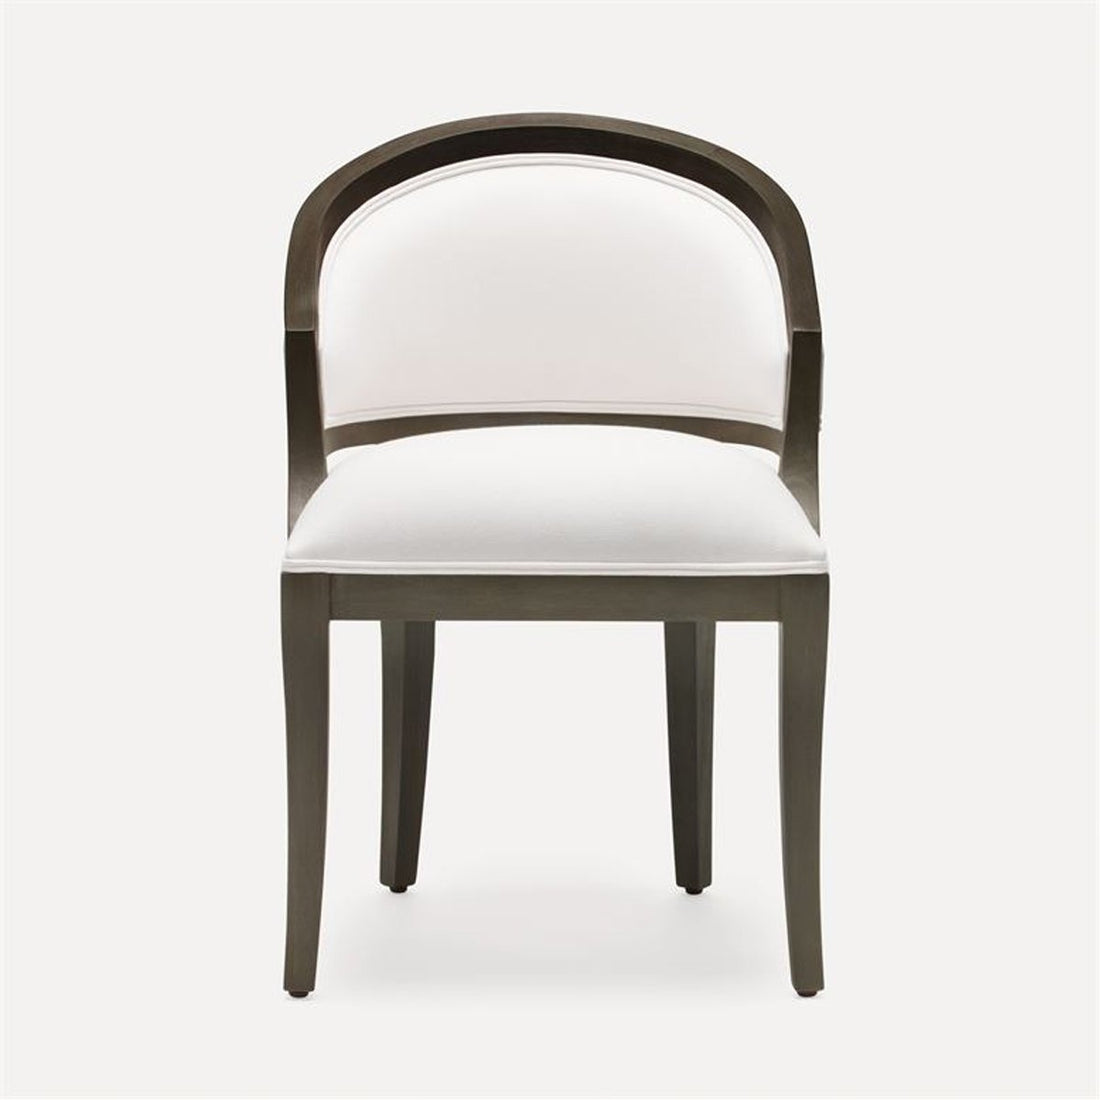 Made Goods Sylvie Curved Back Dining Chair, Colorado Leather